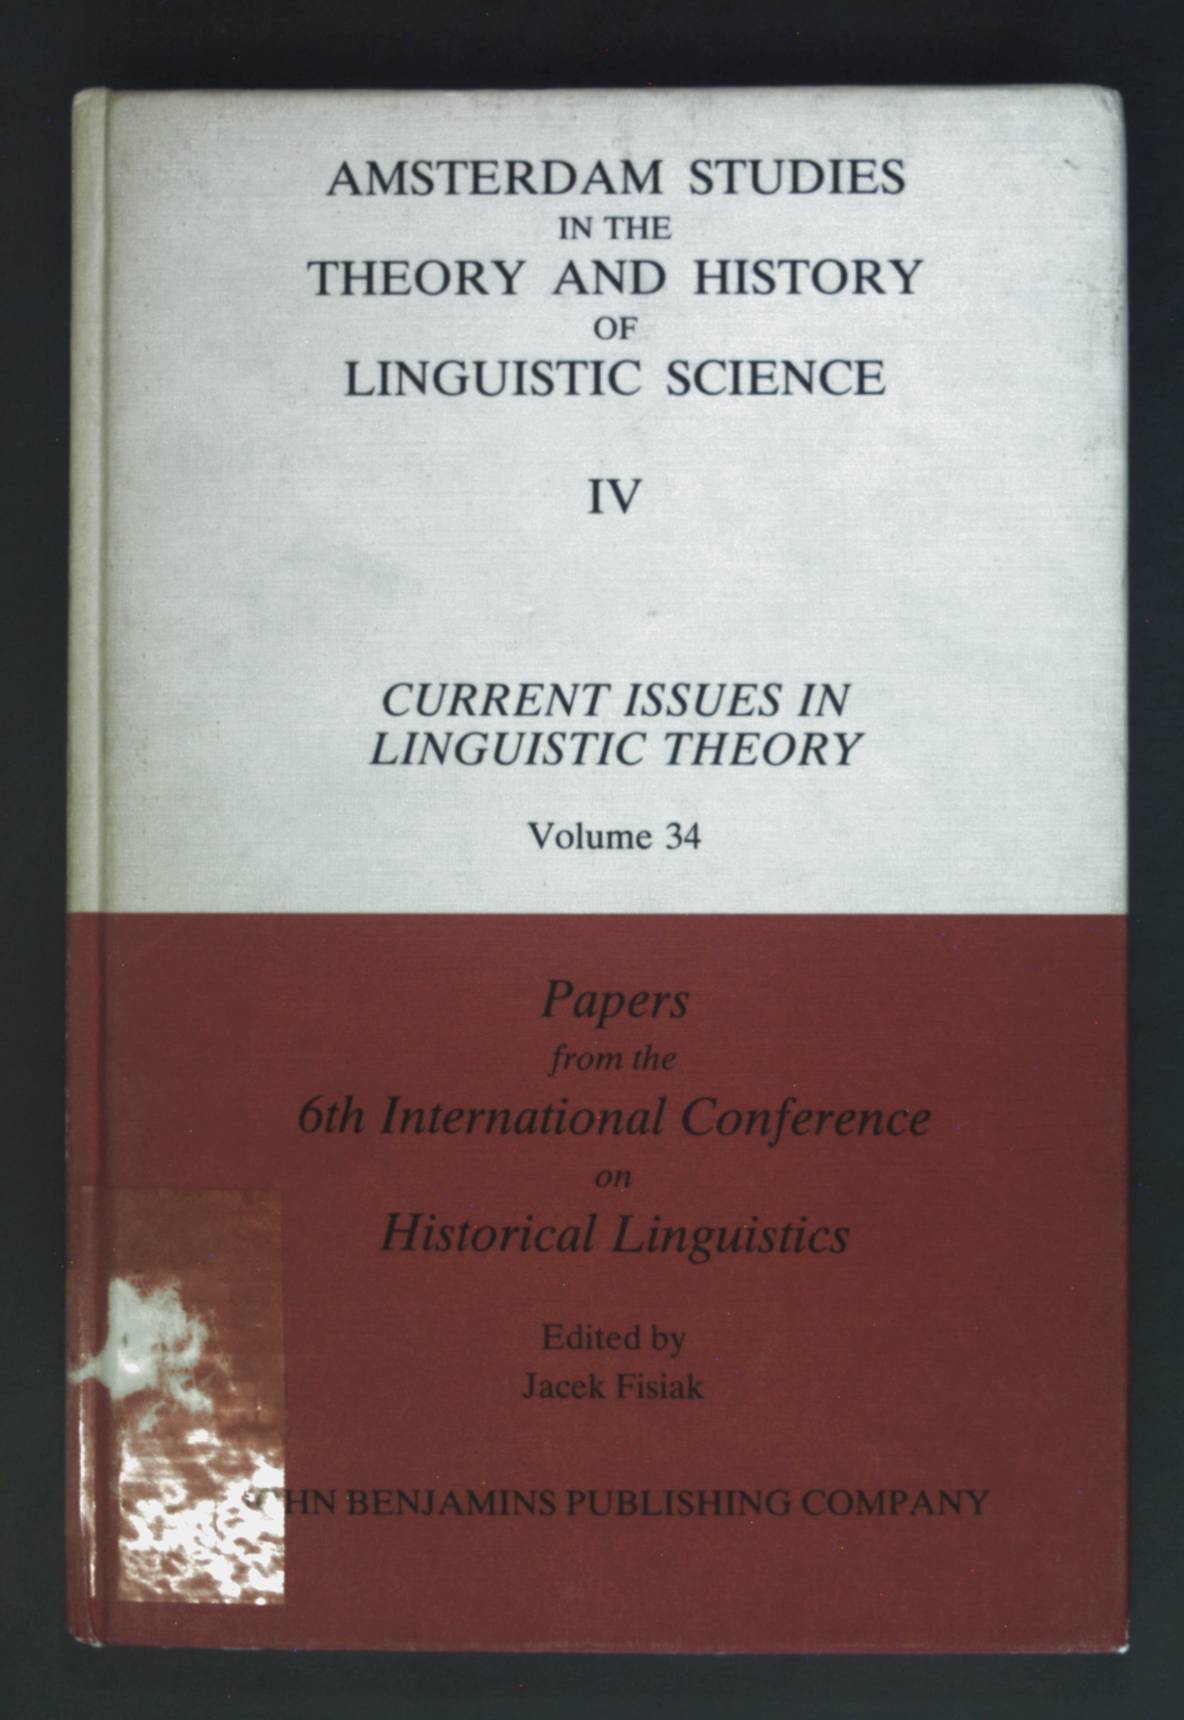 Papers from the 6th International Conference on Historical Linguistics. Amsterdam Studies in the Theory and History of Linguistic Science: Series IV - Volume 34 First Edition - Fisiak, Jacek